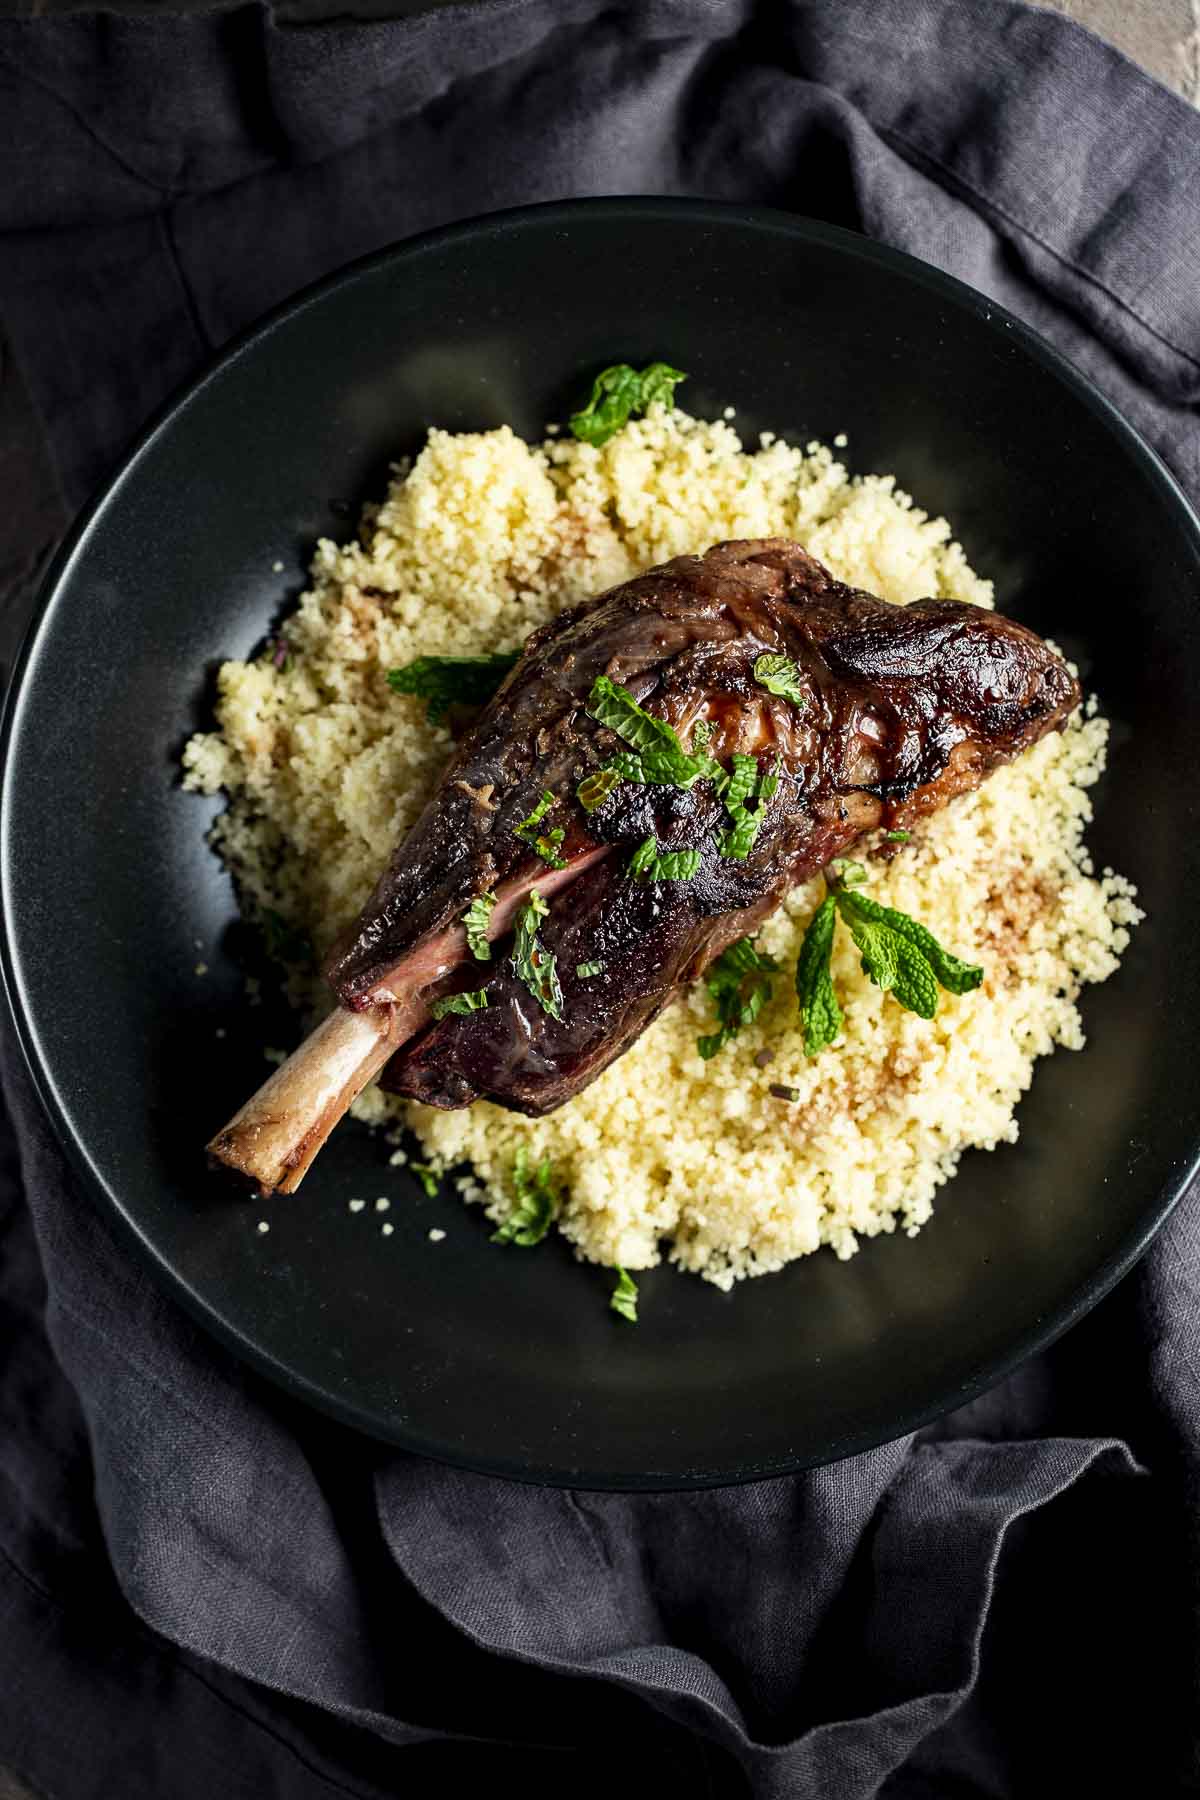 Overhead view of a lamb shank served on top of couscous on a black plate.